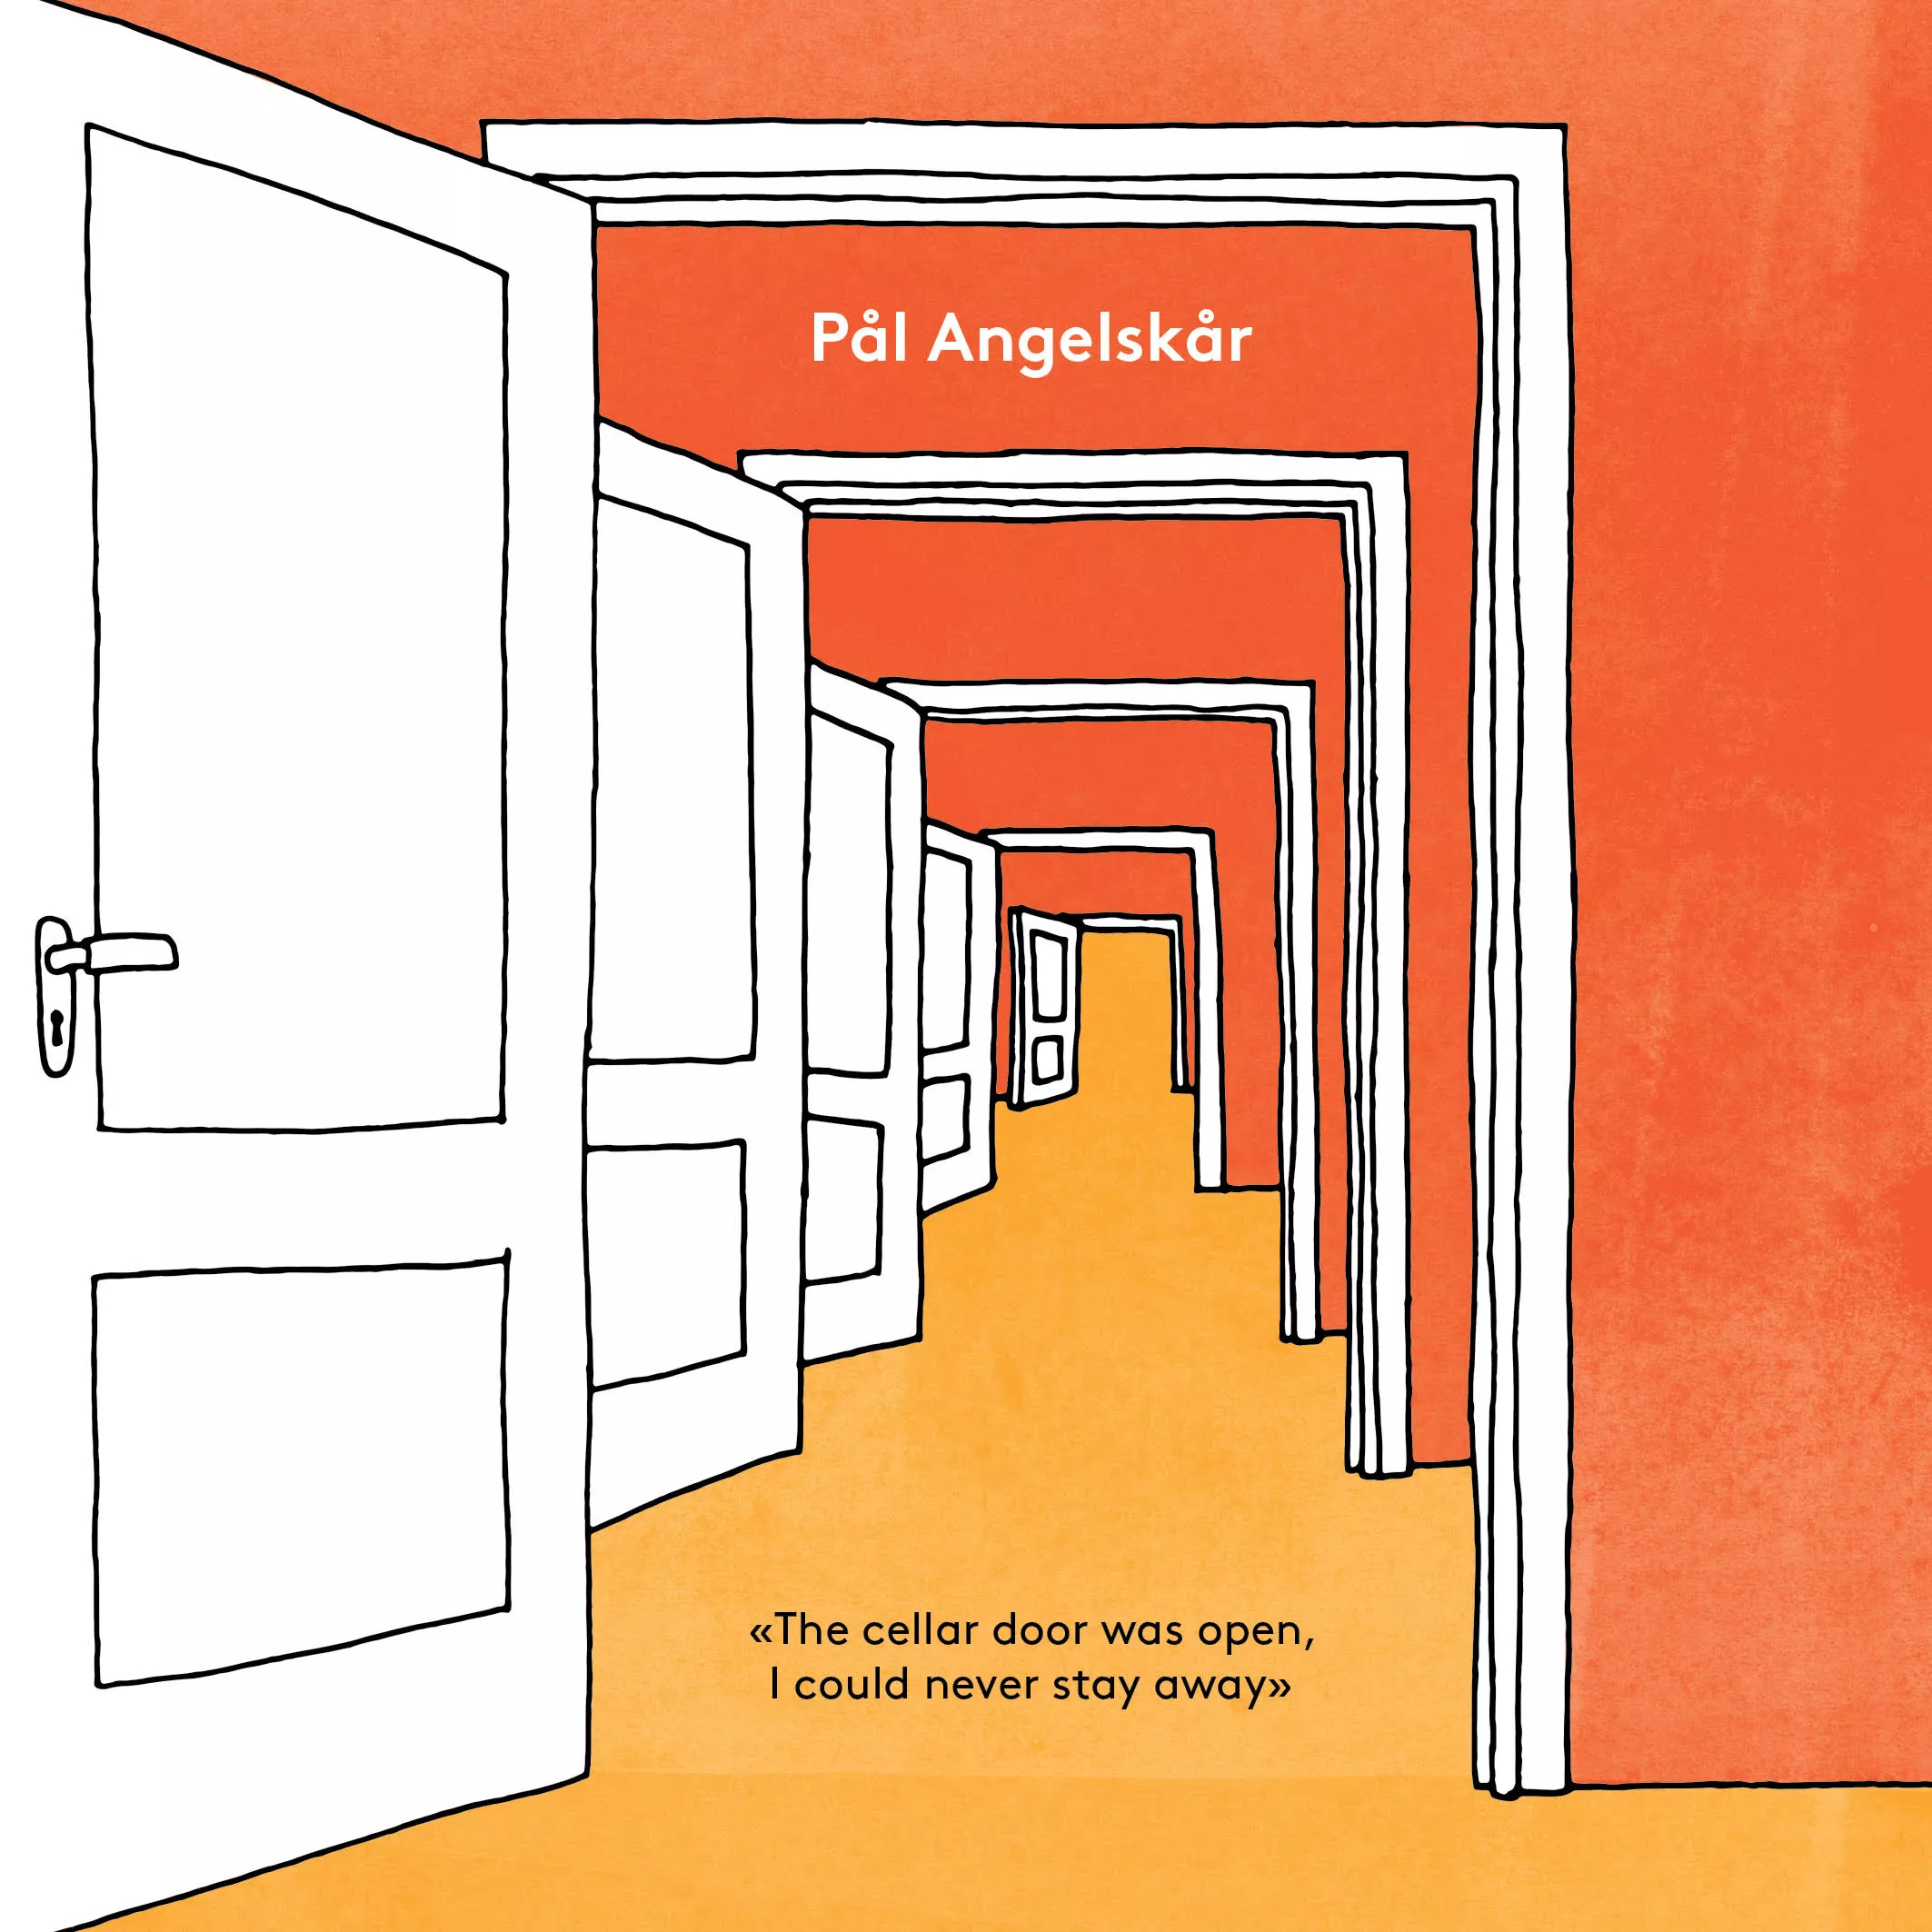 The Cellar Door Was Open, I Could Never Stay Away - Pål Angelskår